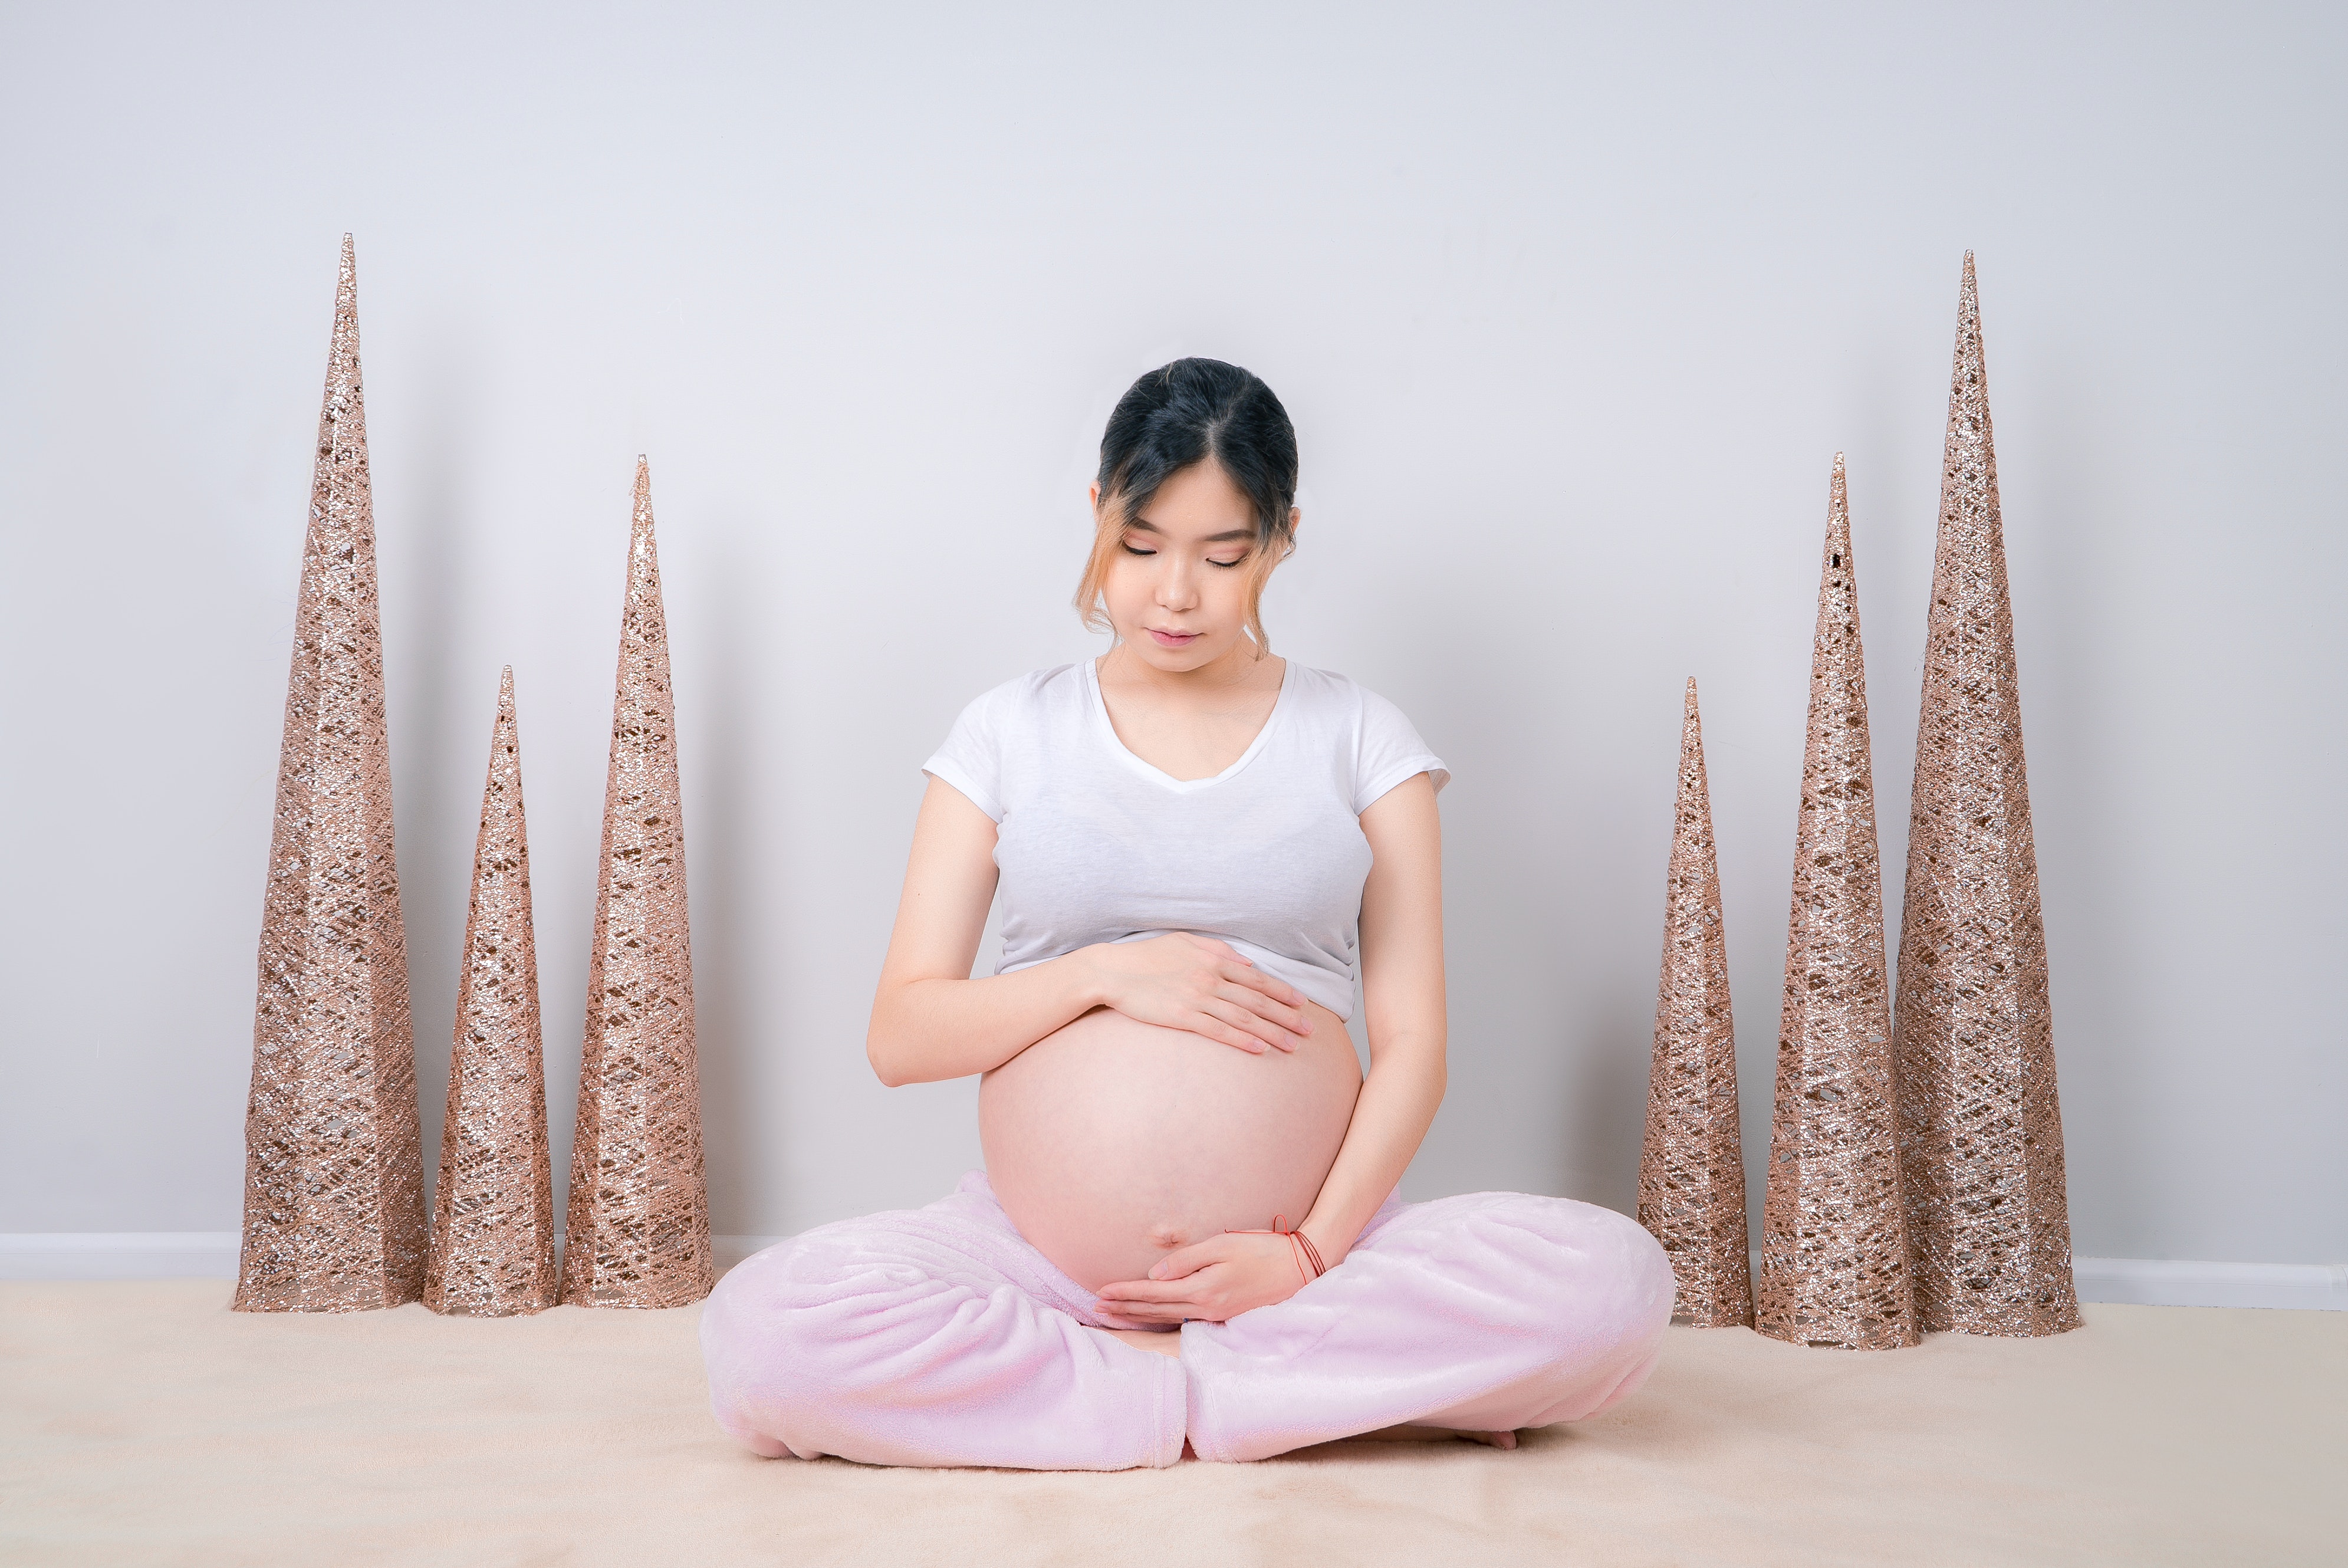 woman-showing-her-baby-bump-while-sitting-on-floor-3596662